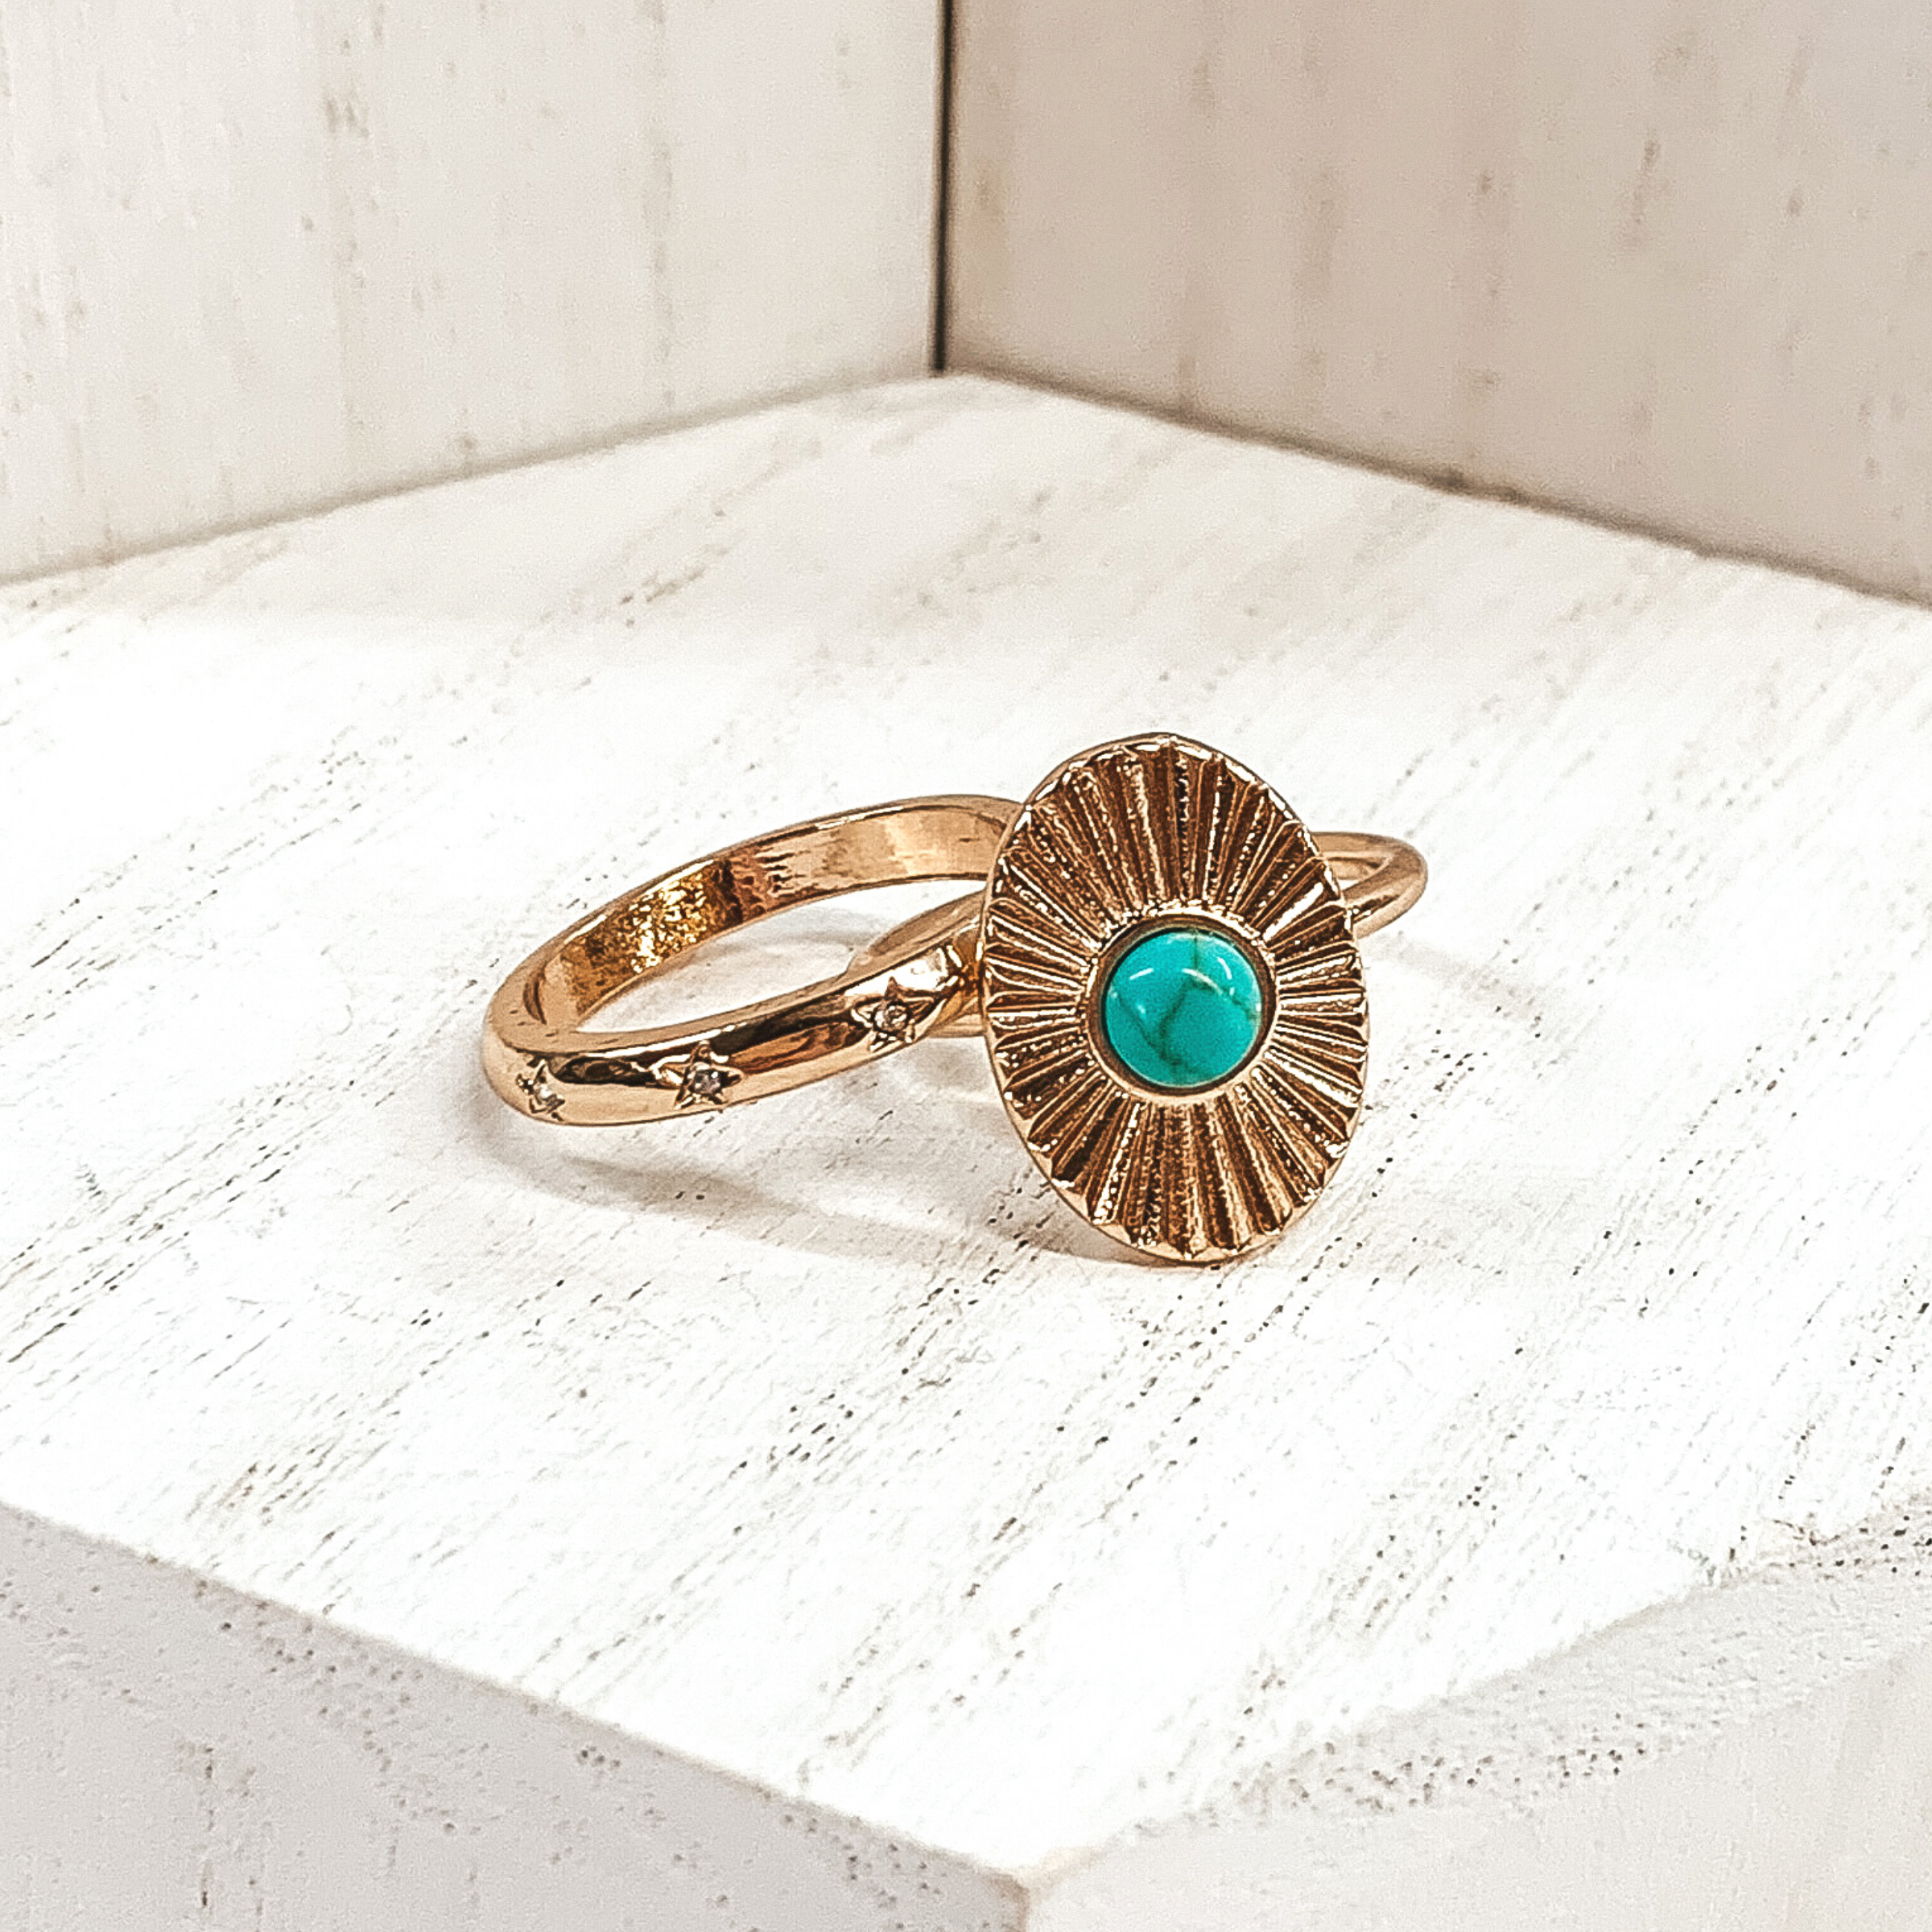 Both rings are gold in color. The first ring has an oval pendant with a starburst design on it and a center turquoise stone. The second ring has tiny engraved stars with clear crystals in the center of them These rings are pictured on a white background.